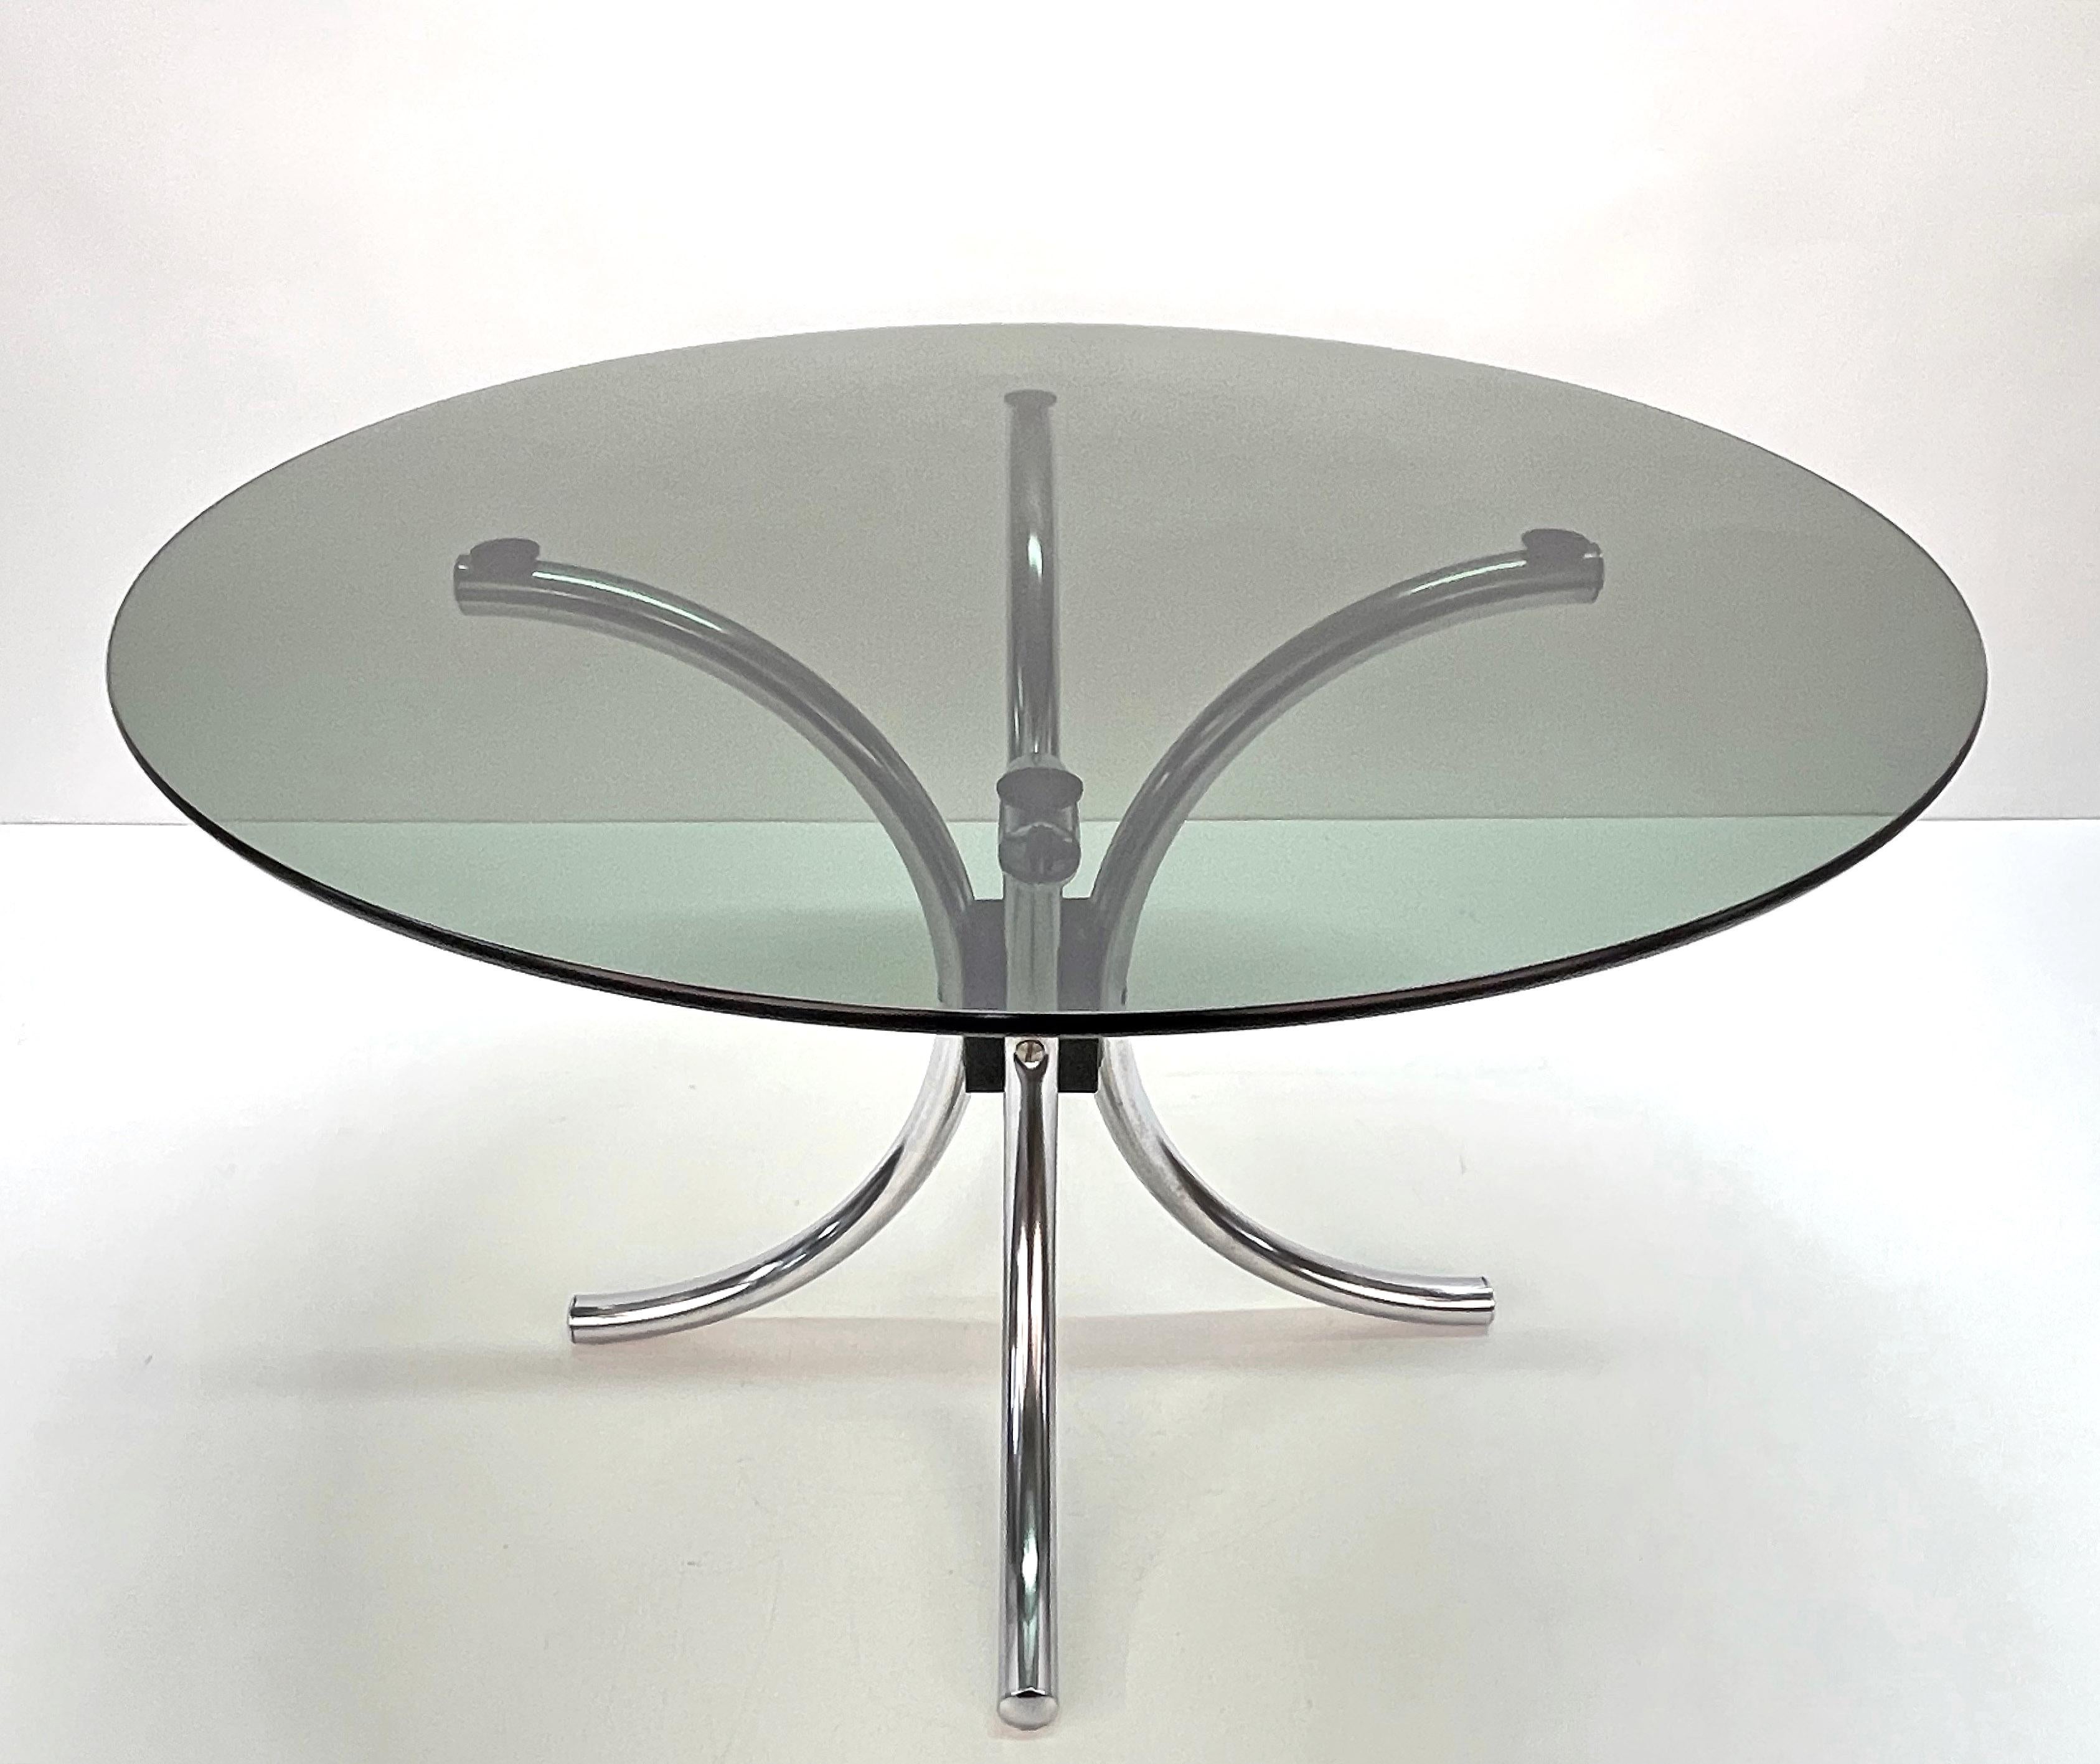 Beautiful coffee table in chromed steel with smoked round glass top. This fantastic item was produced in Italy during the 1960s.

This atomic-style Italian coffee table features a base made of four chromed metal tubes and a smoked glass top.

A